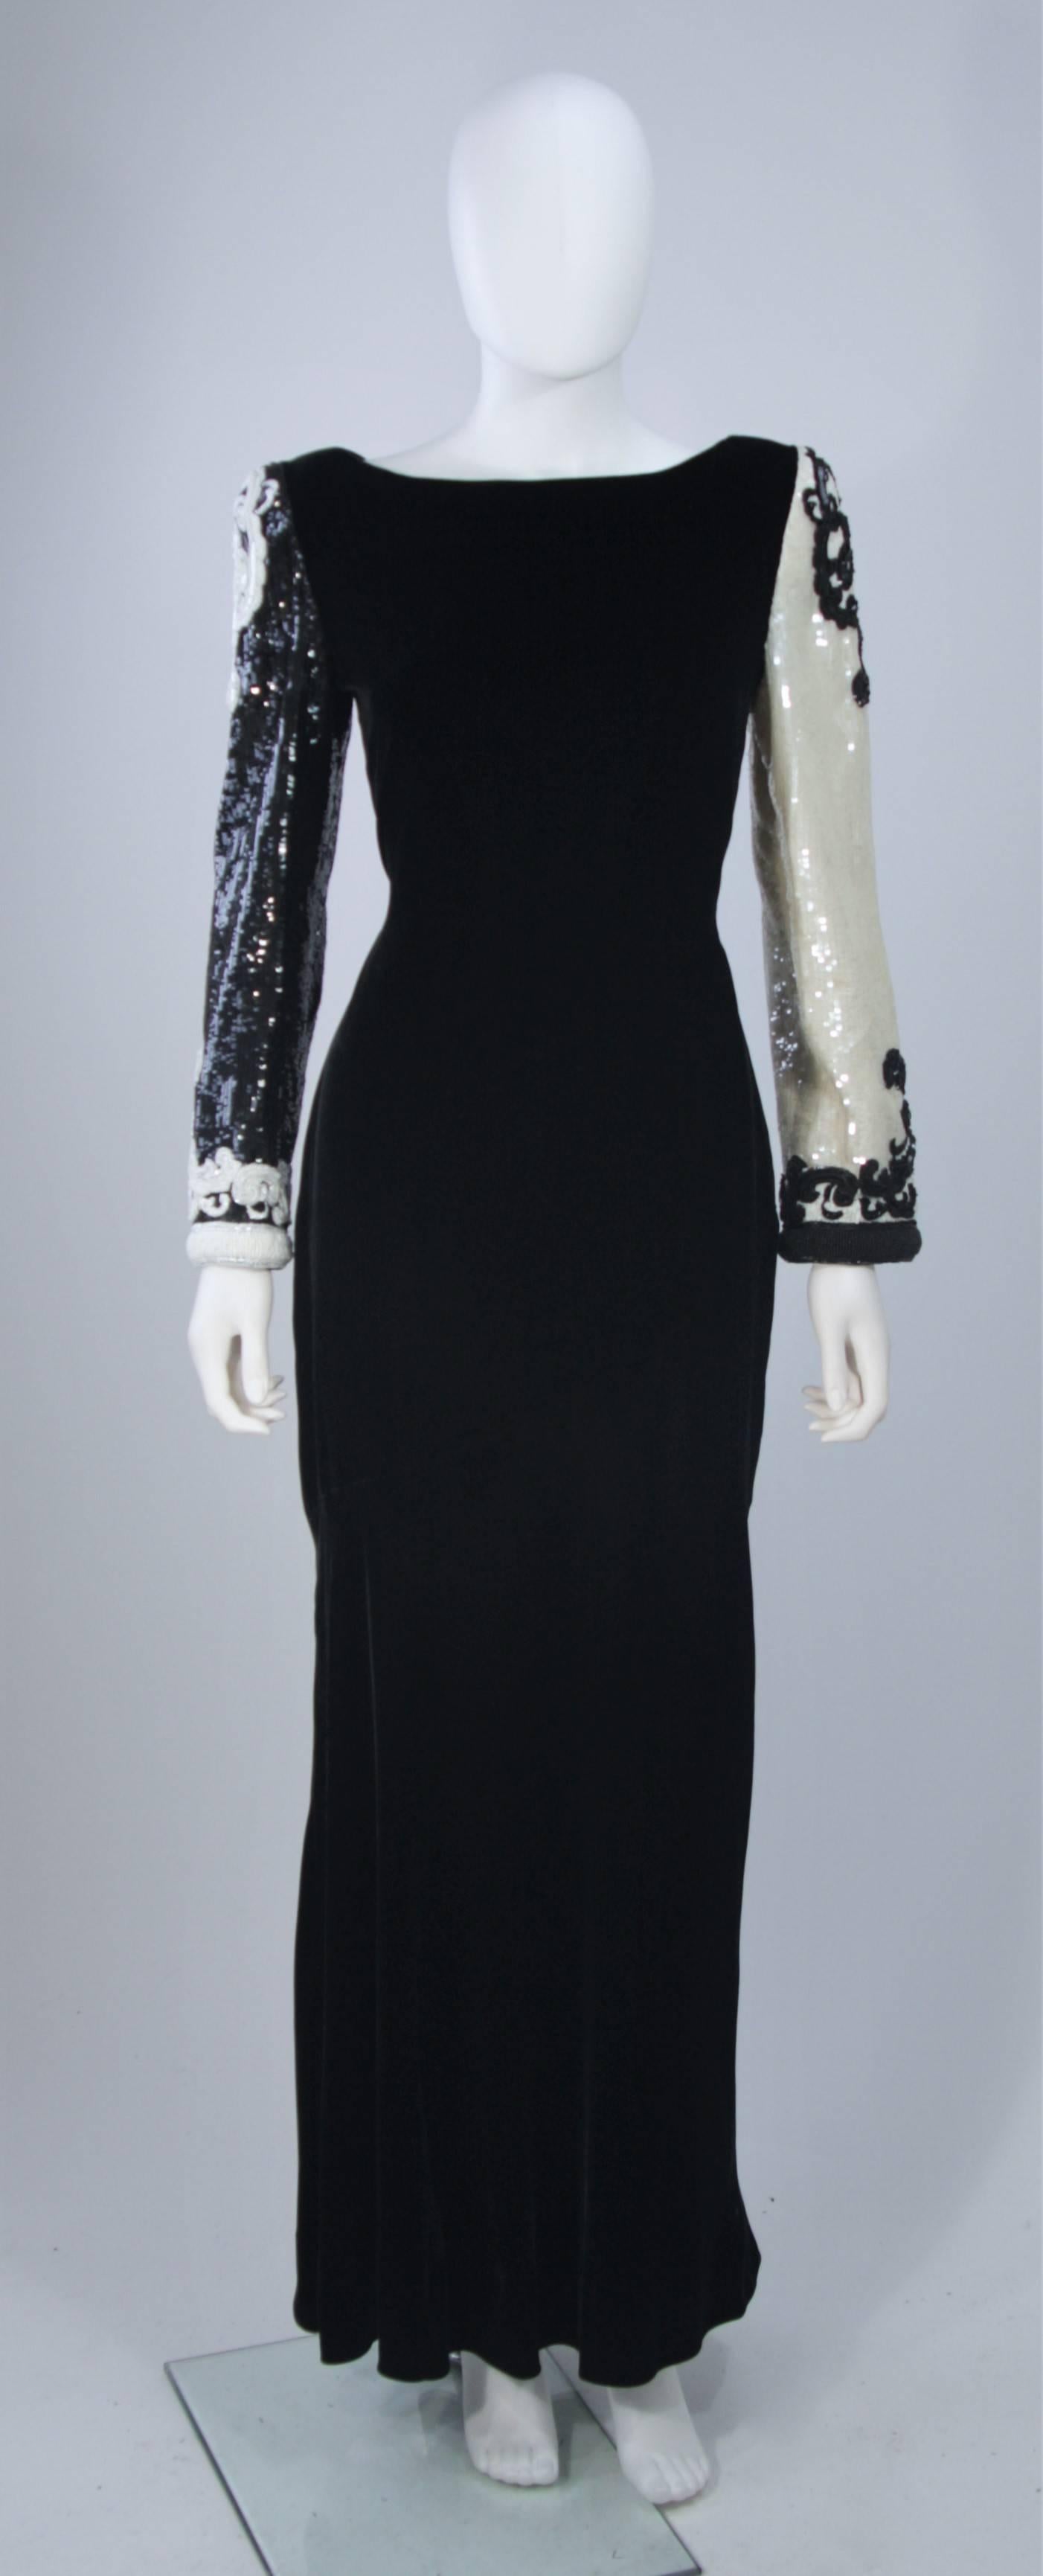  This Bill Blass gown is composed of a black velvet and features sequin sleeves with beading. There is a center back zipper closure, shoulder pads, and boat style neckline. In excellent vintage condition. 

 **Please cross-reference measurements